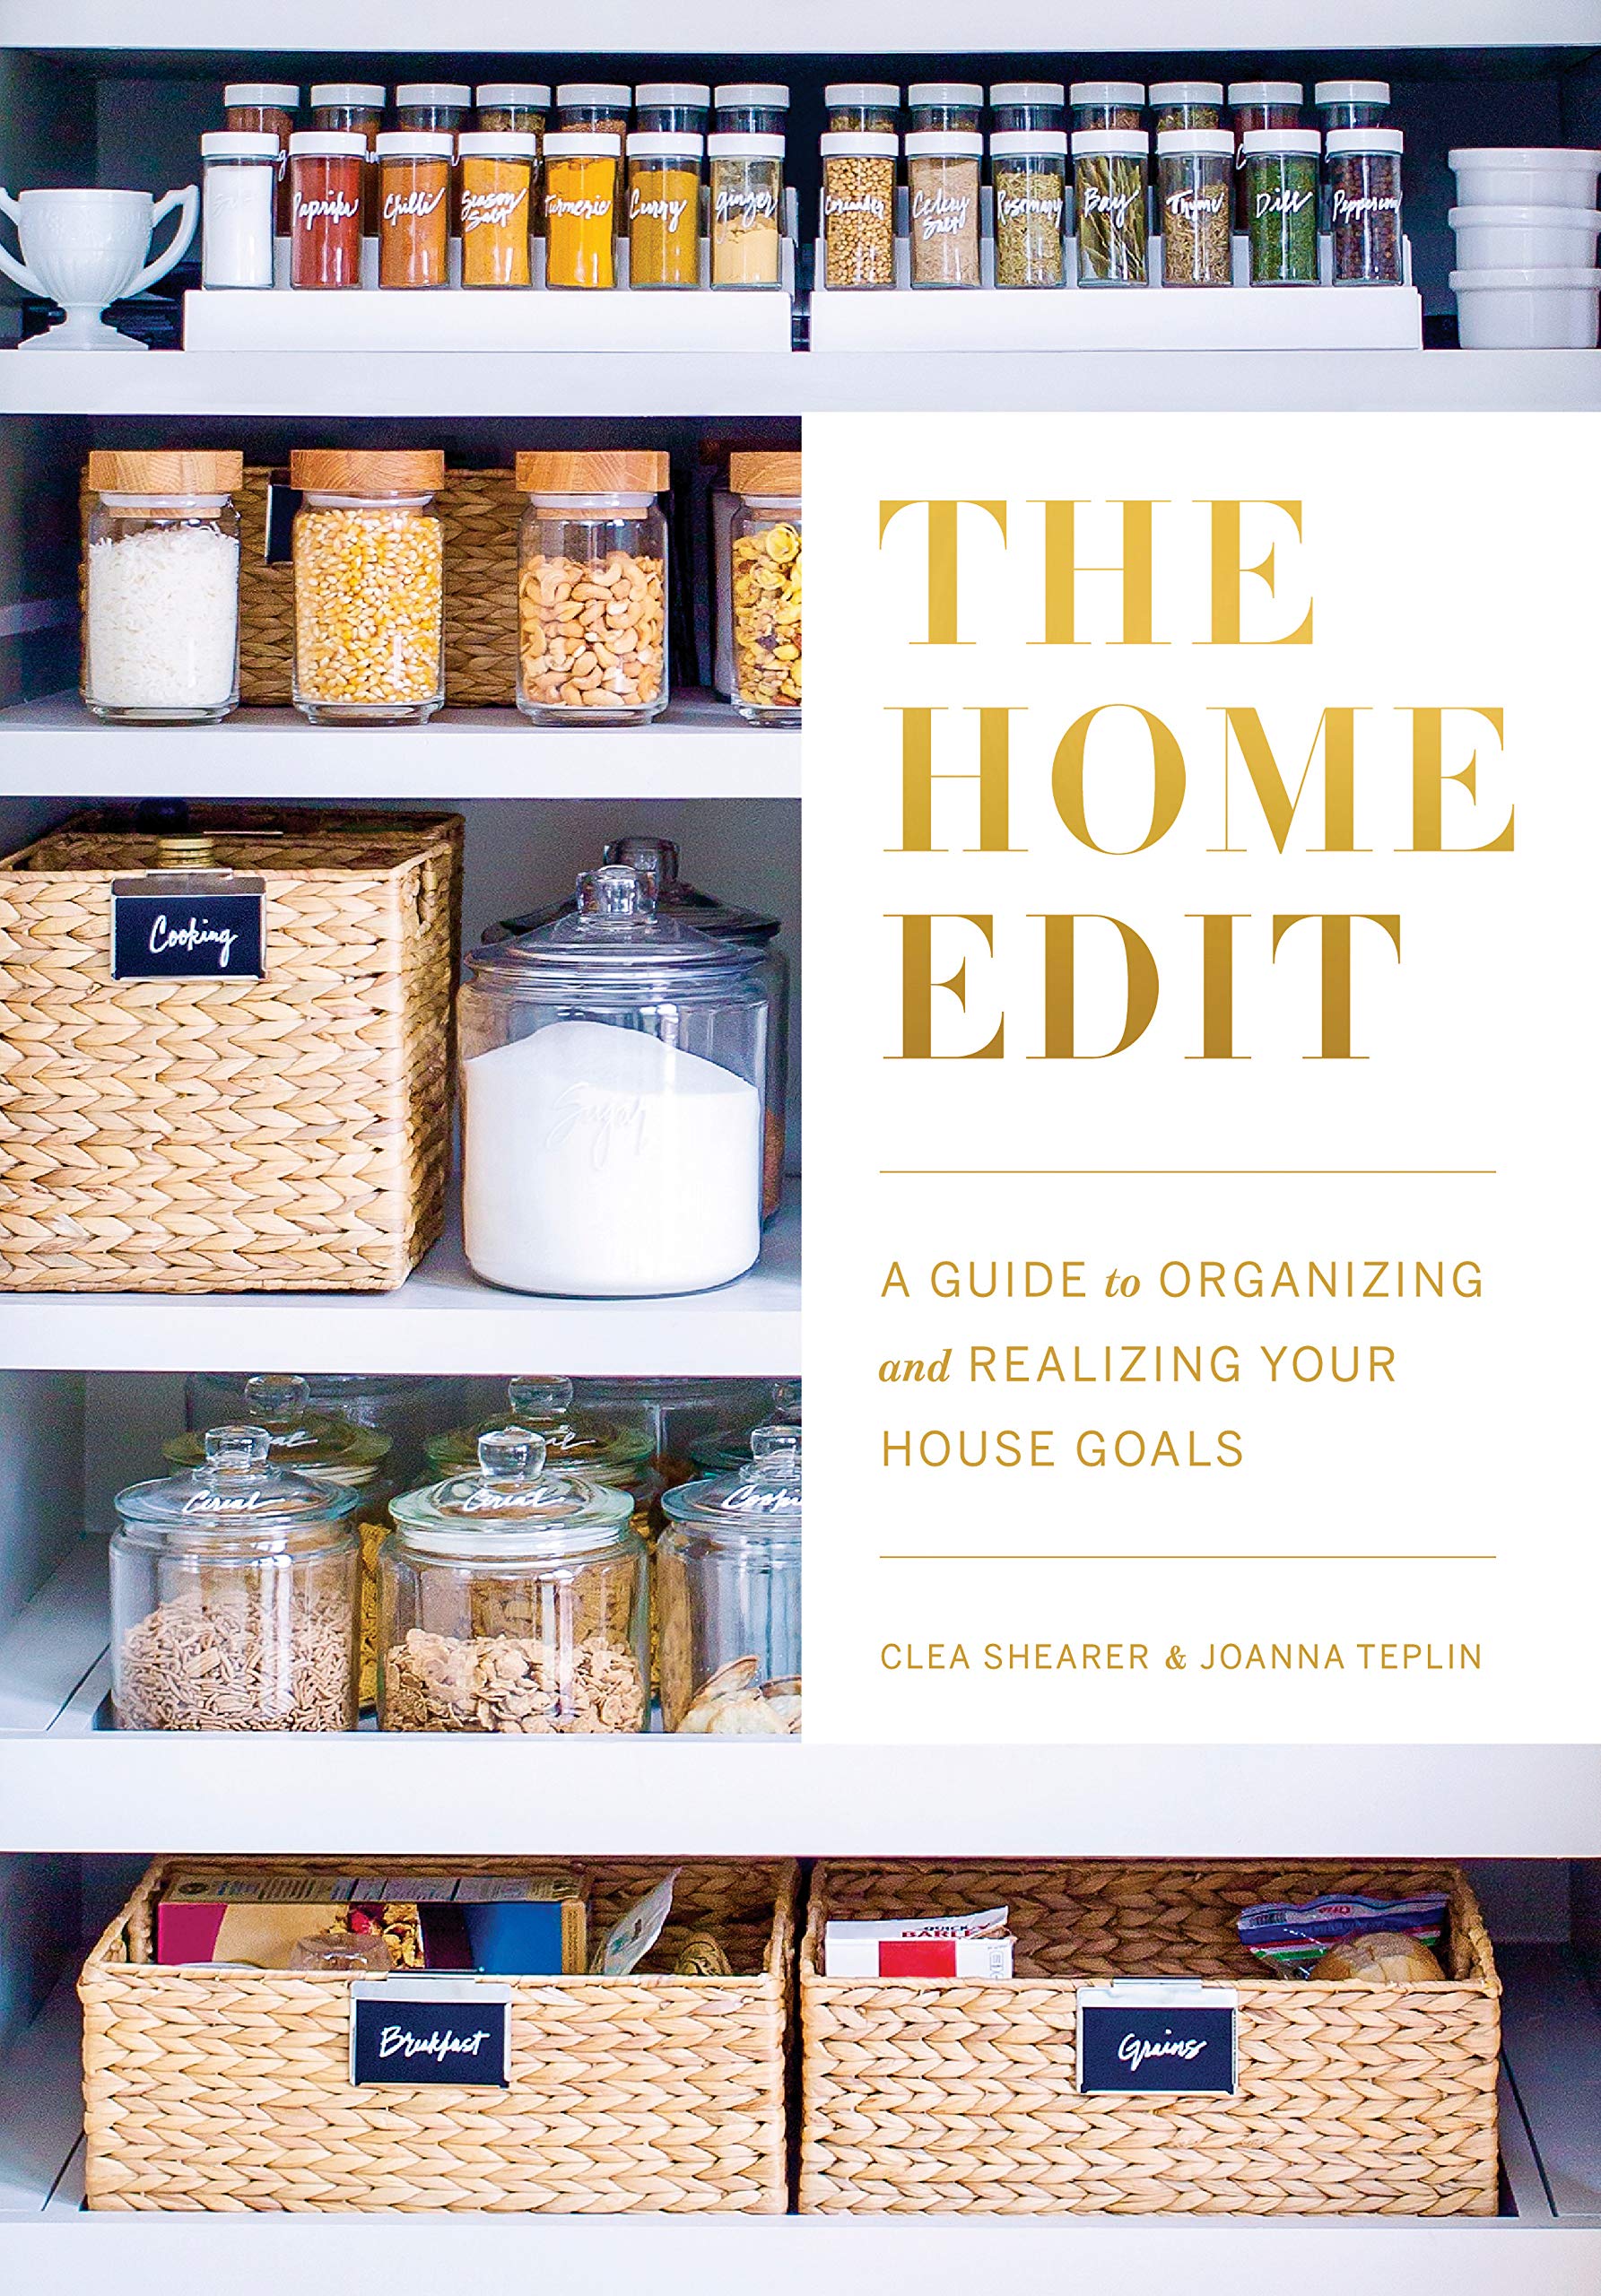 A Guide to Organizing and Realizing Your House Goals